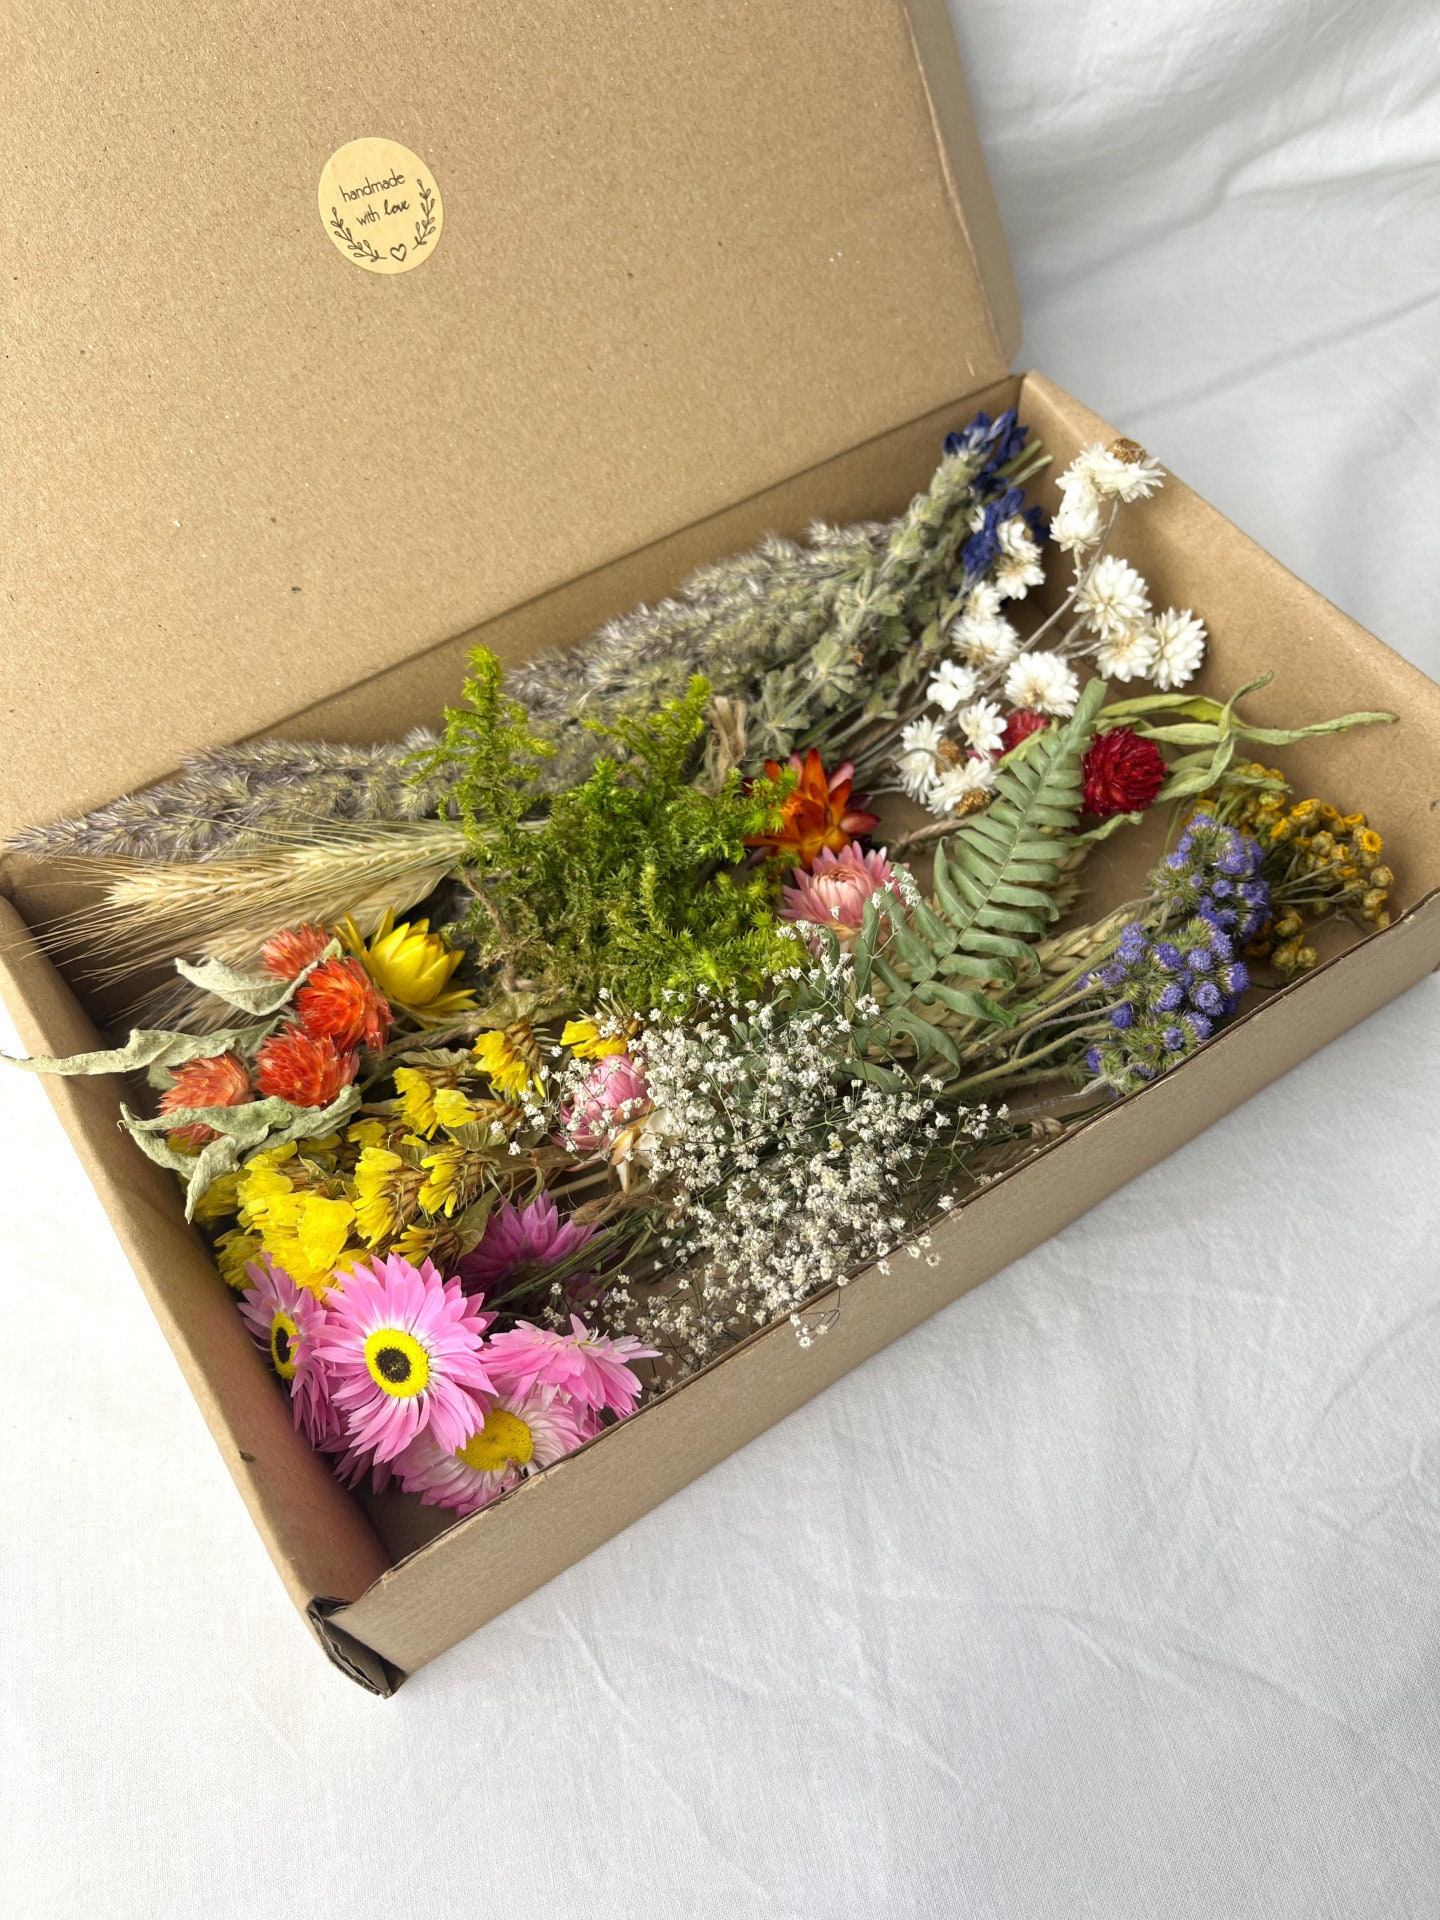 1 Box Mixed Dried Flowers Plants for Candle Epoxy Resin Jewelry Making DIY  Craft